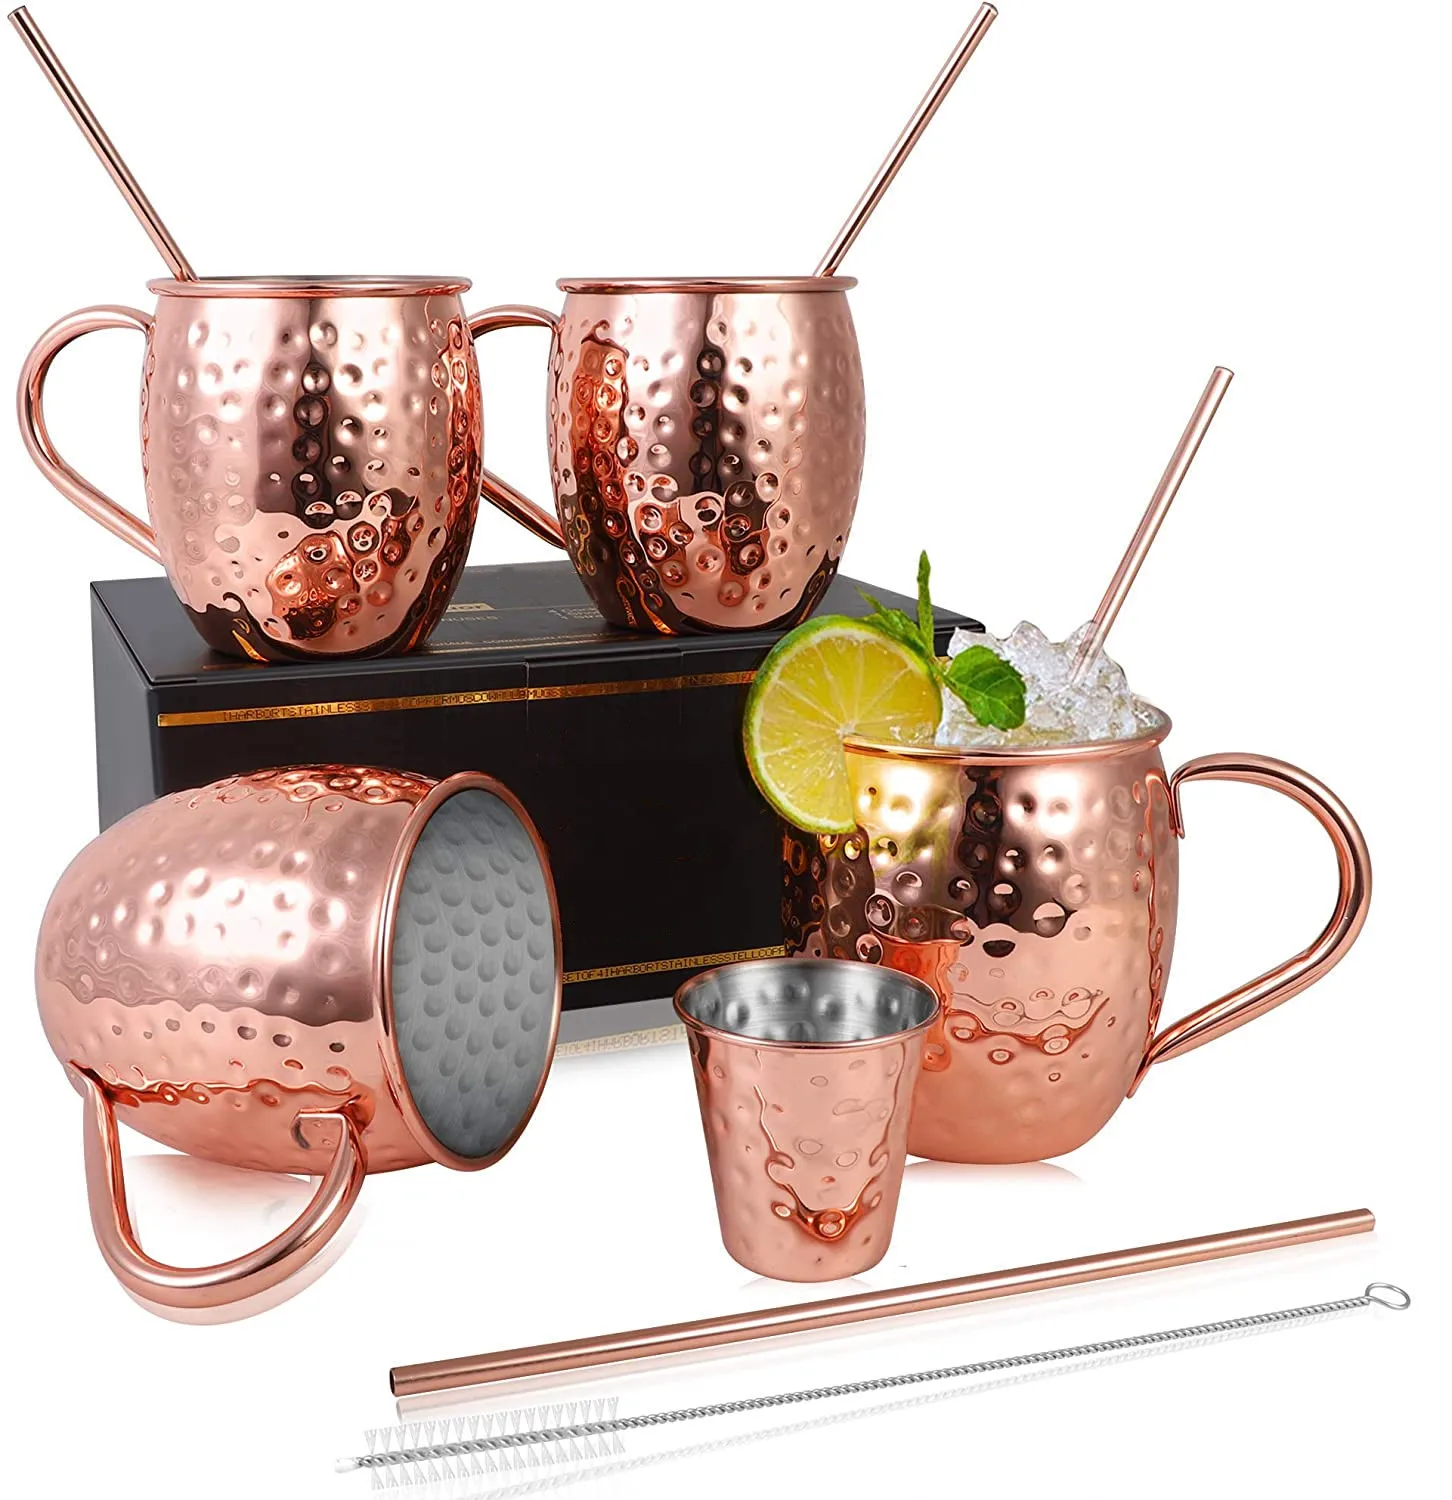 

Amazon Hot Selling Moscow Mule Copper Mugs Beer Glasses Set of 2 Solid Stainless steel Copper Beer Mugs Wine Tumbler Cups, As picture show